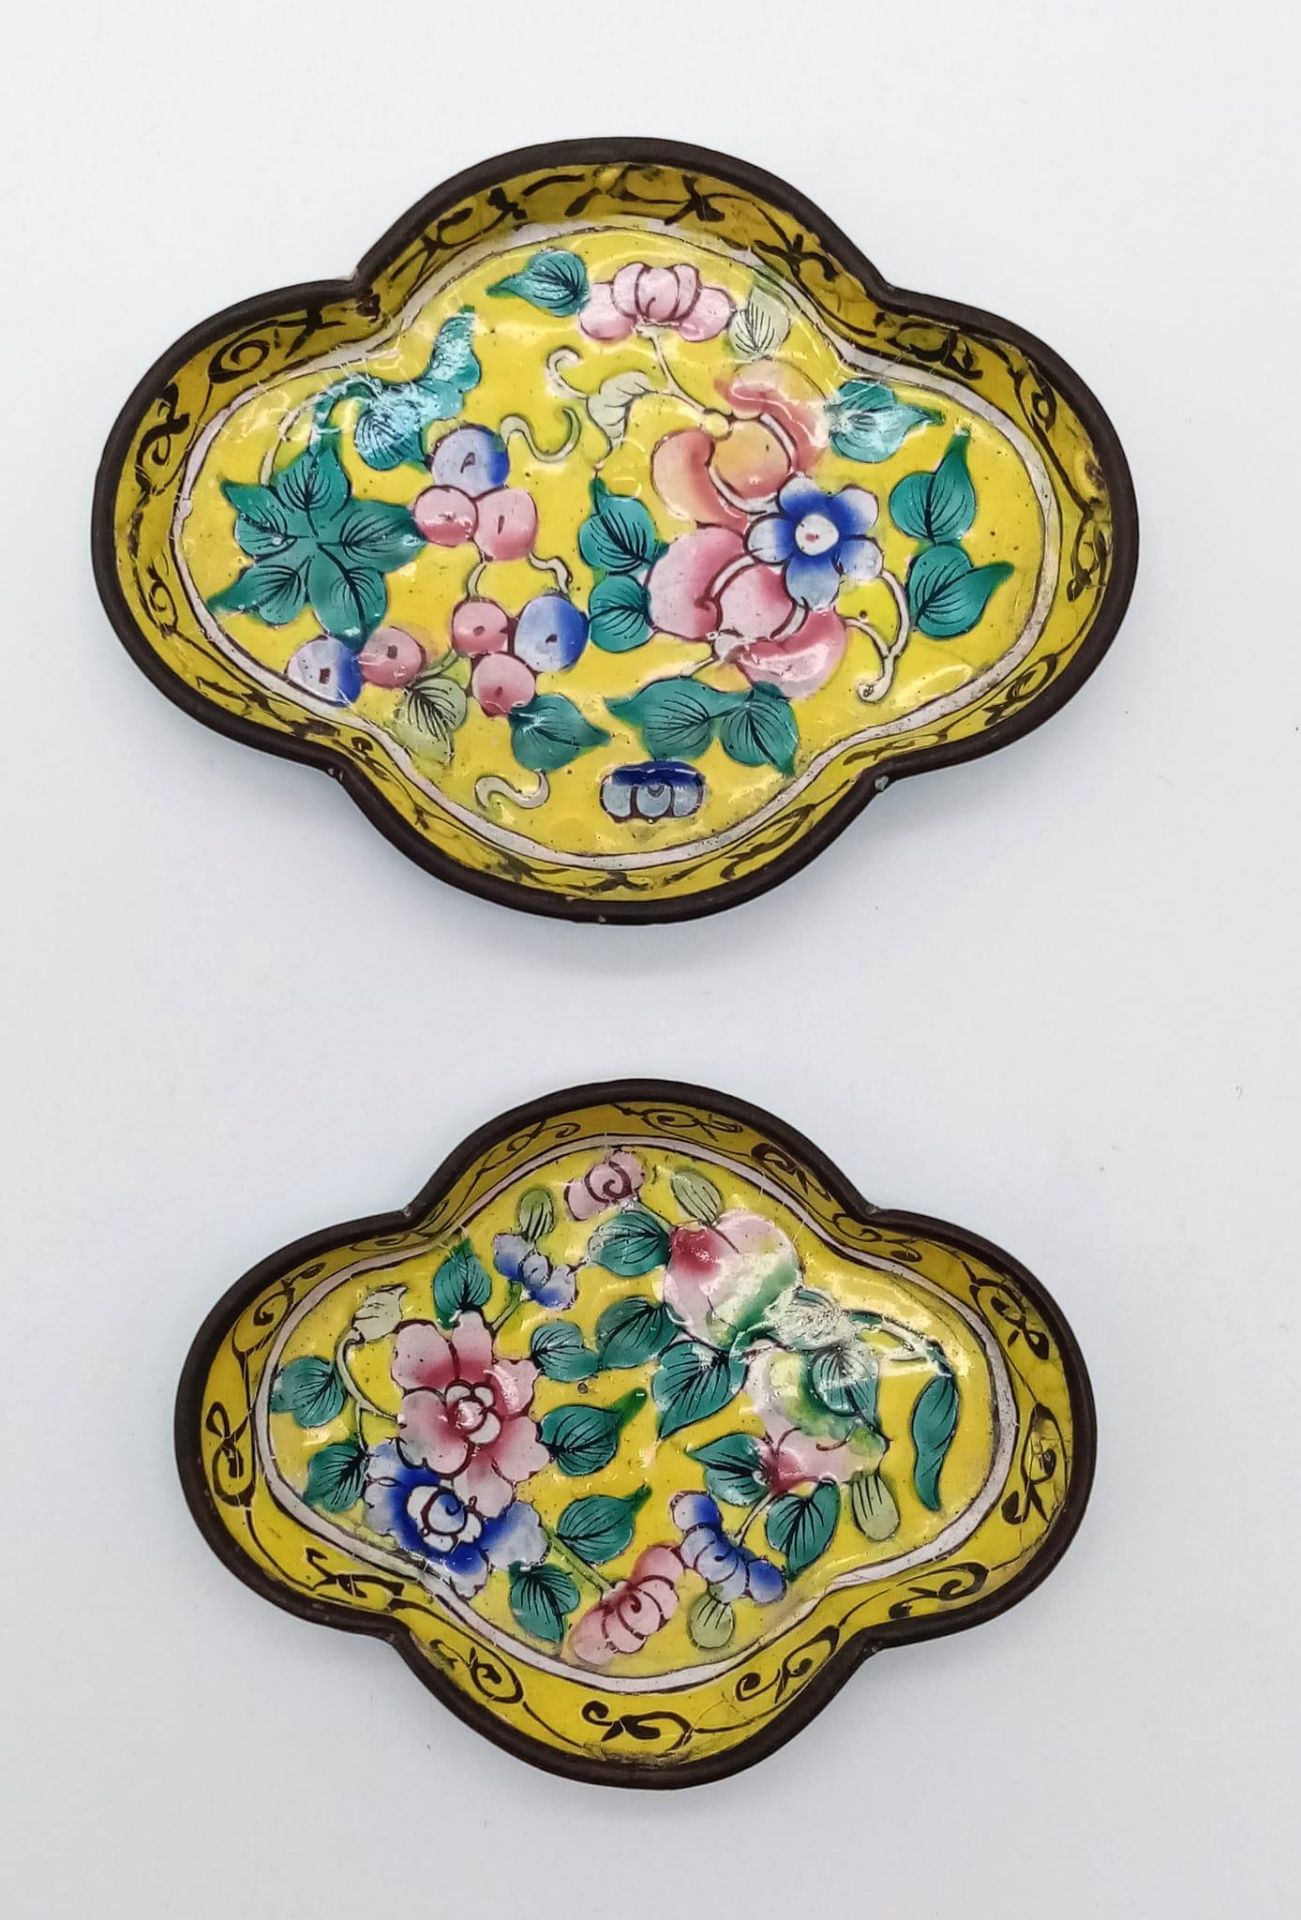 A pair of wonderful small Chinese Canton Antique 19th Century Dishes. Vibrant yellow enamel